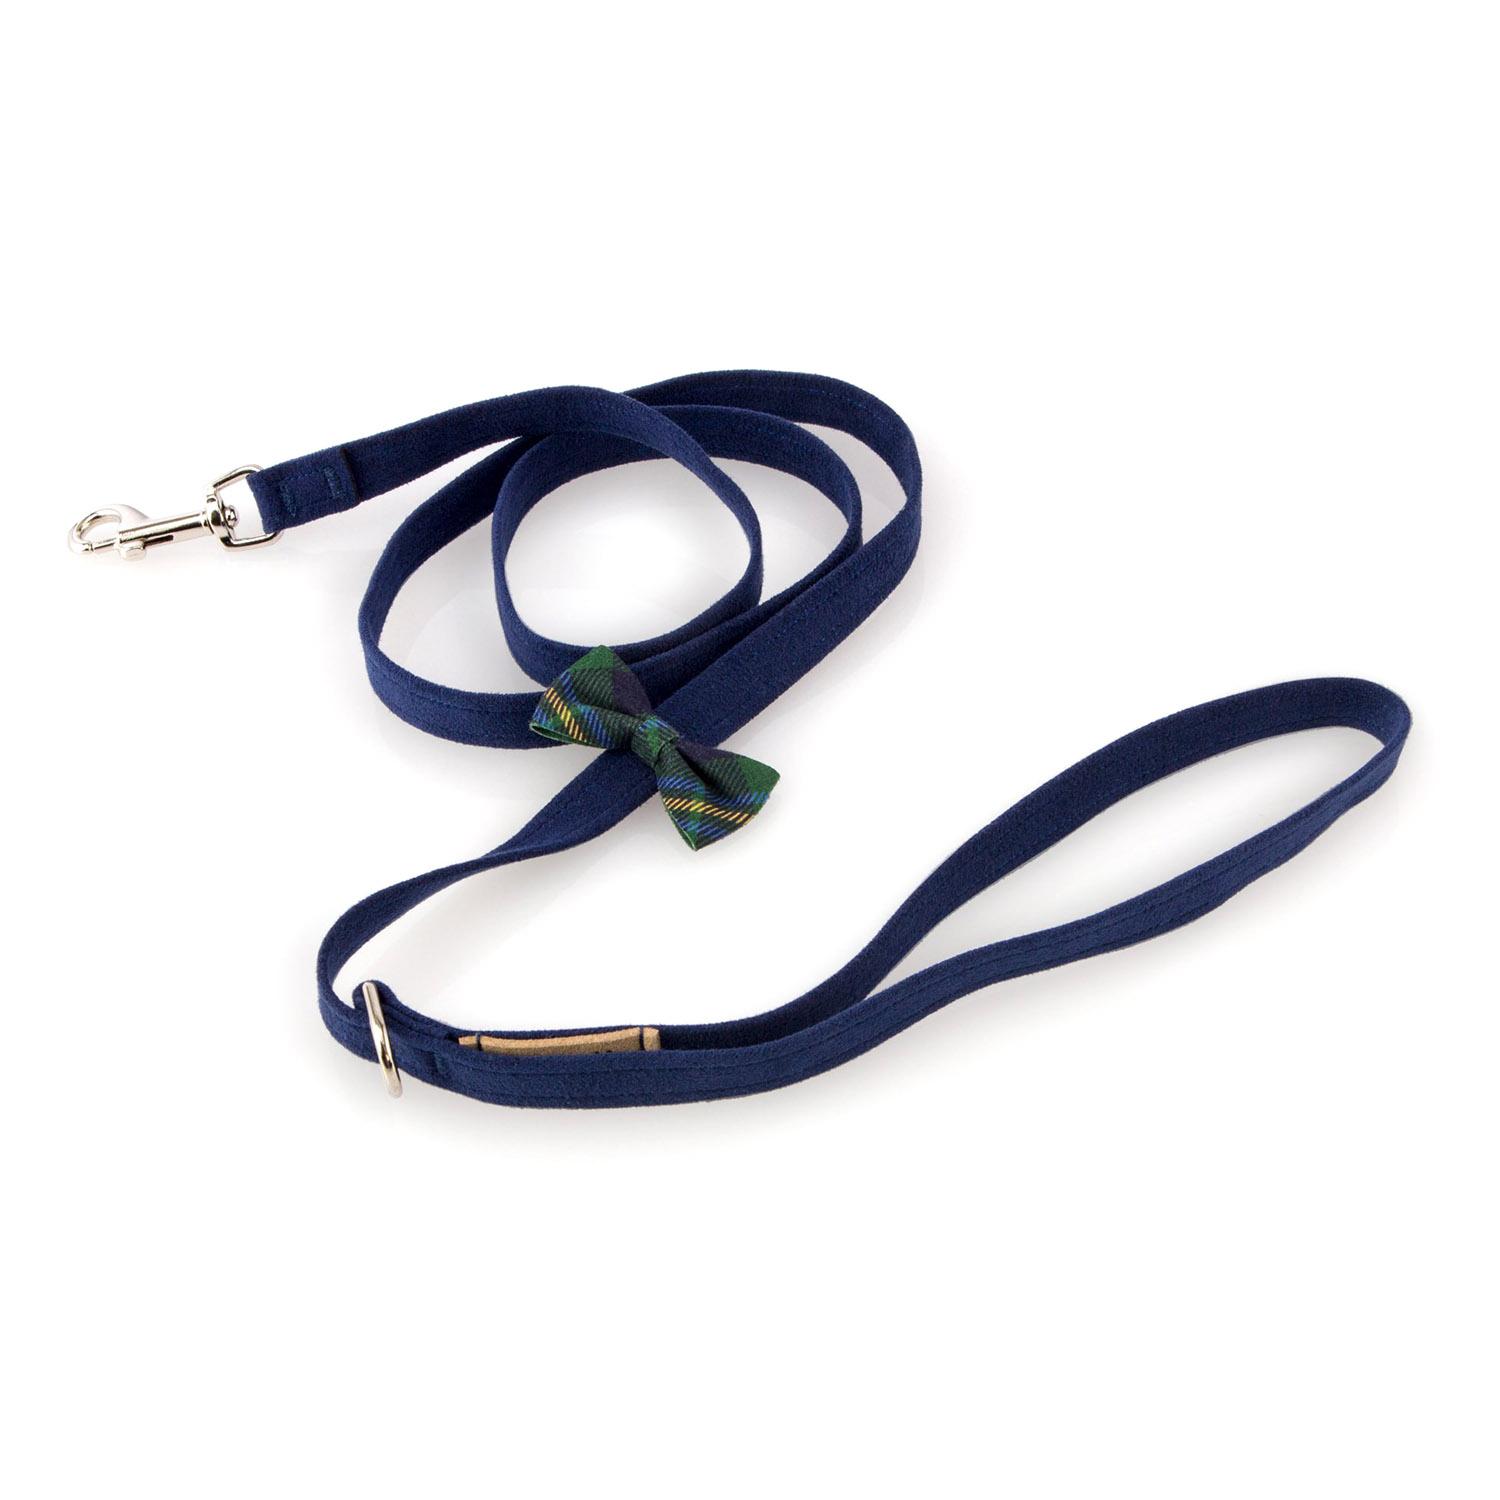 Scotty Bow Tie Dog Leash by Susan Lanci - Navy with Forest Plaid